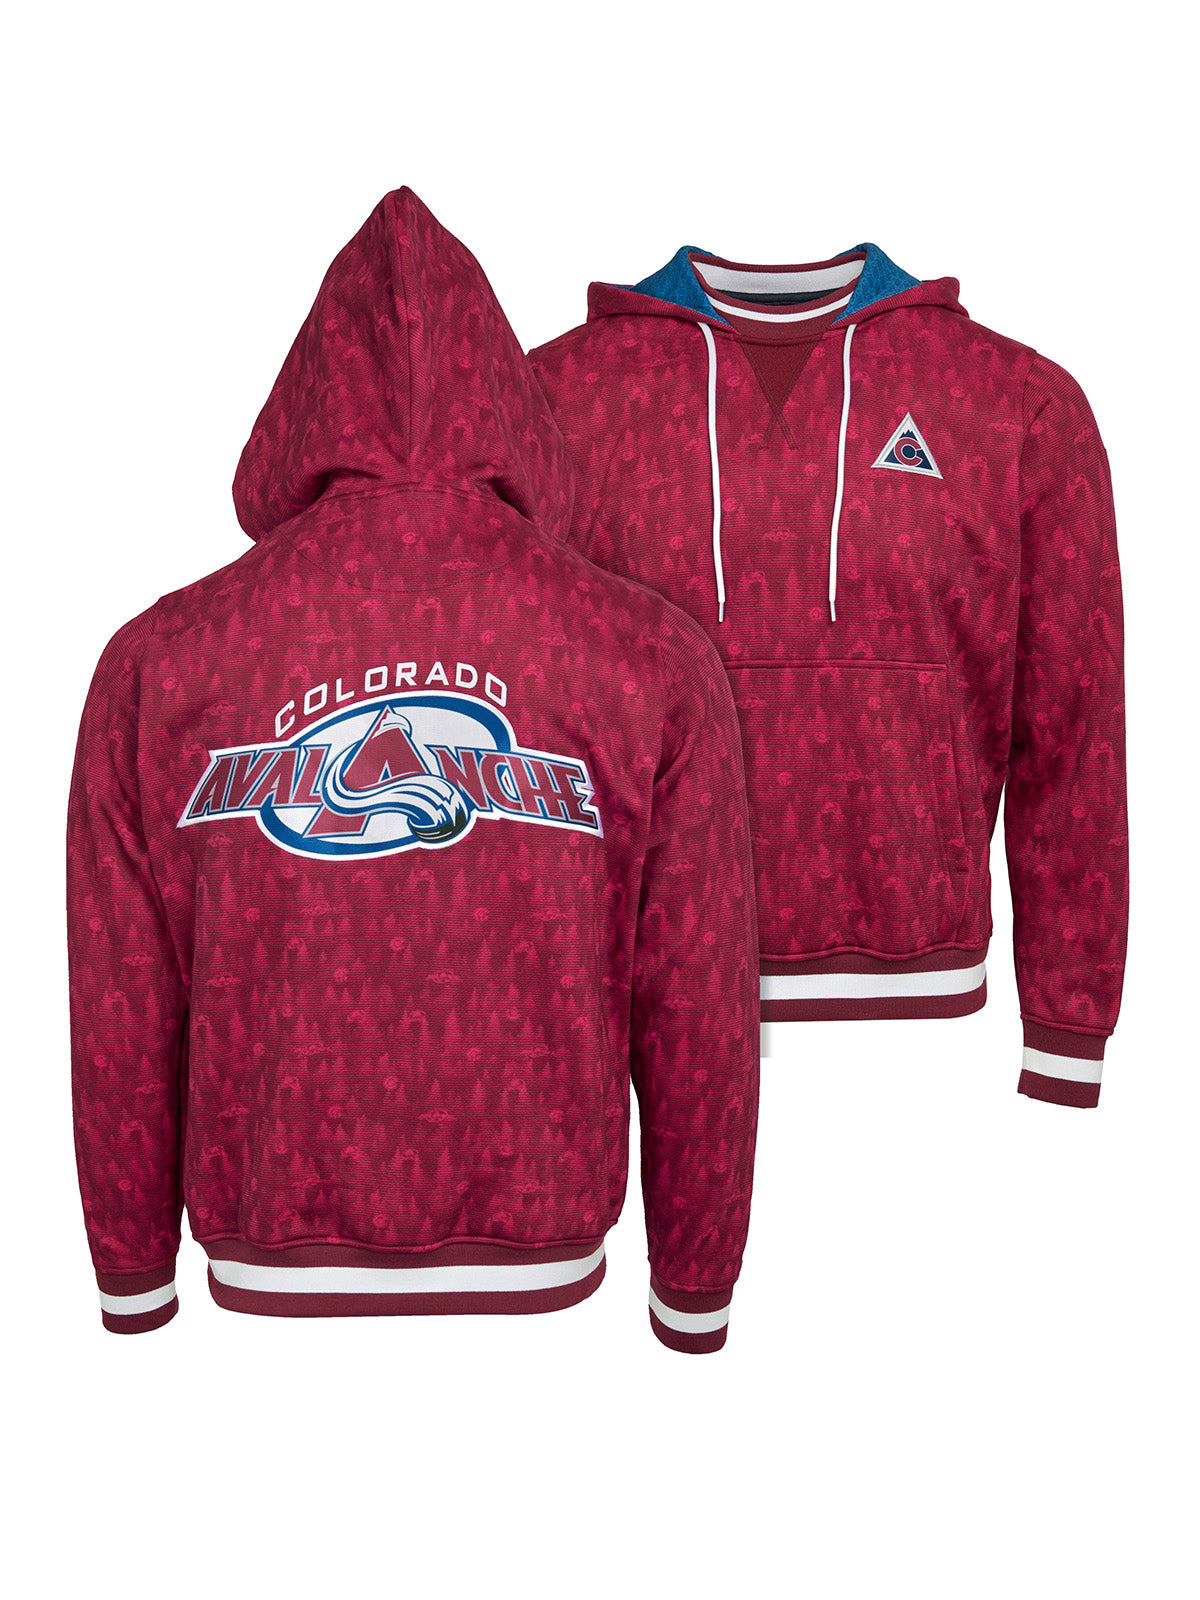 Colorado Avalanche Crew Neck Hoodie, Official NHL Merchandise